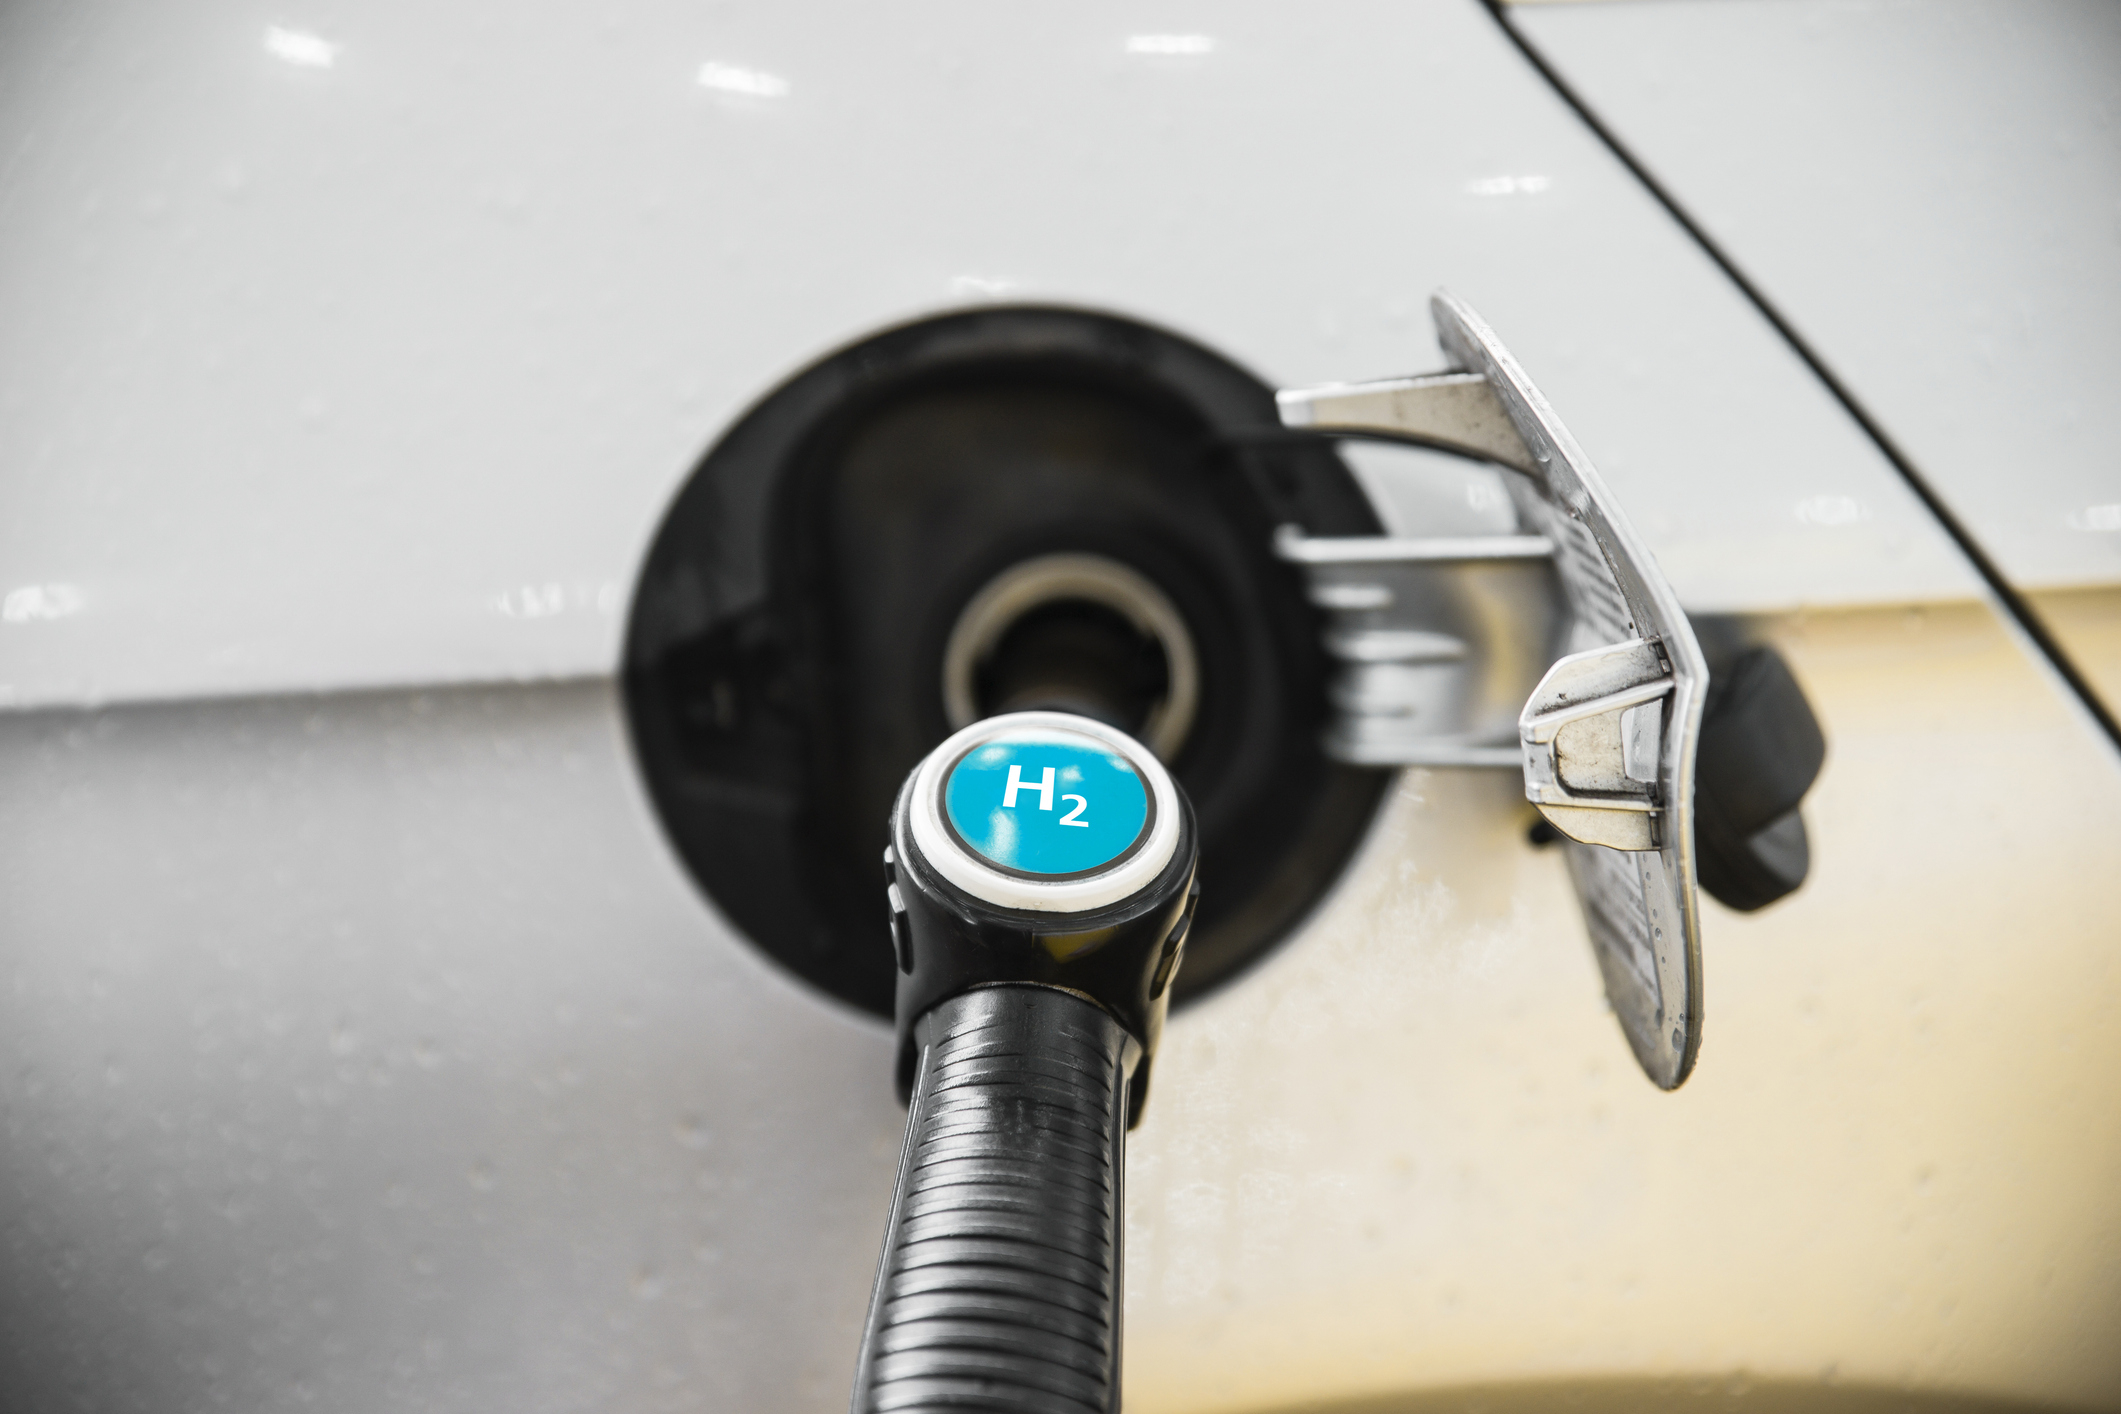 A car being fueled at a hydrogen station, nozzle attached to car&#x27;s tank with H2 label visible